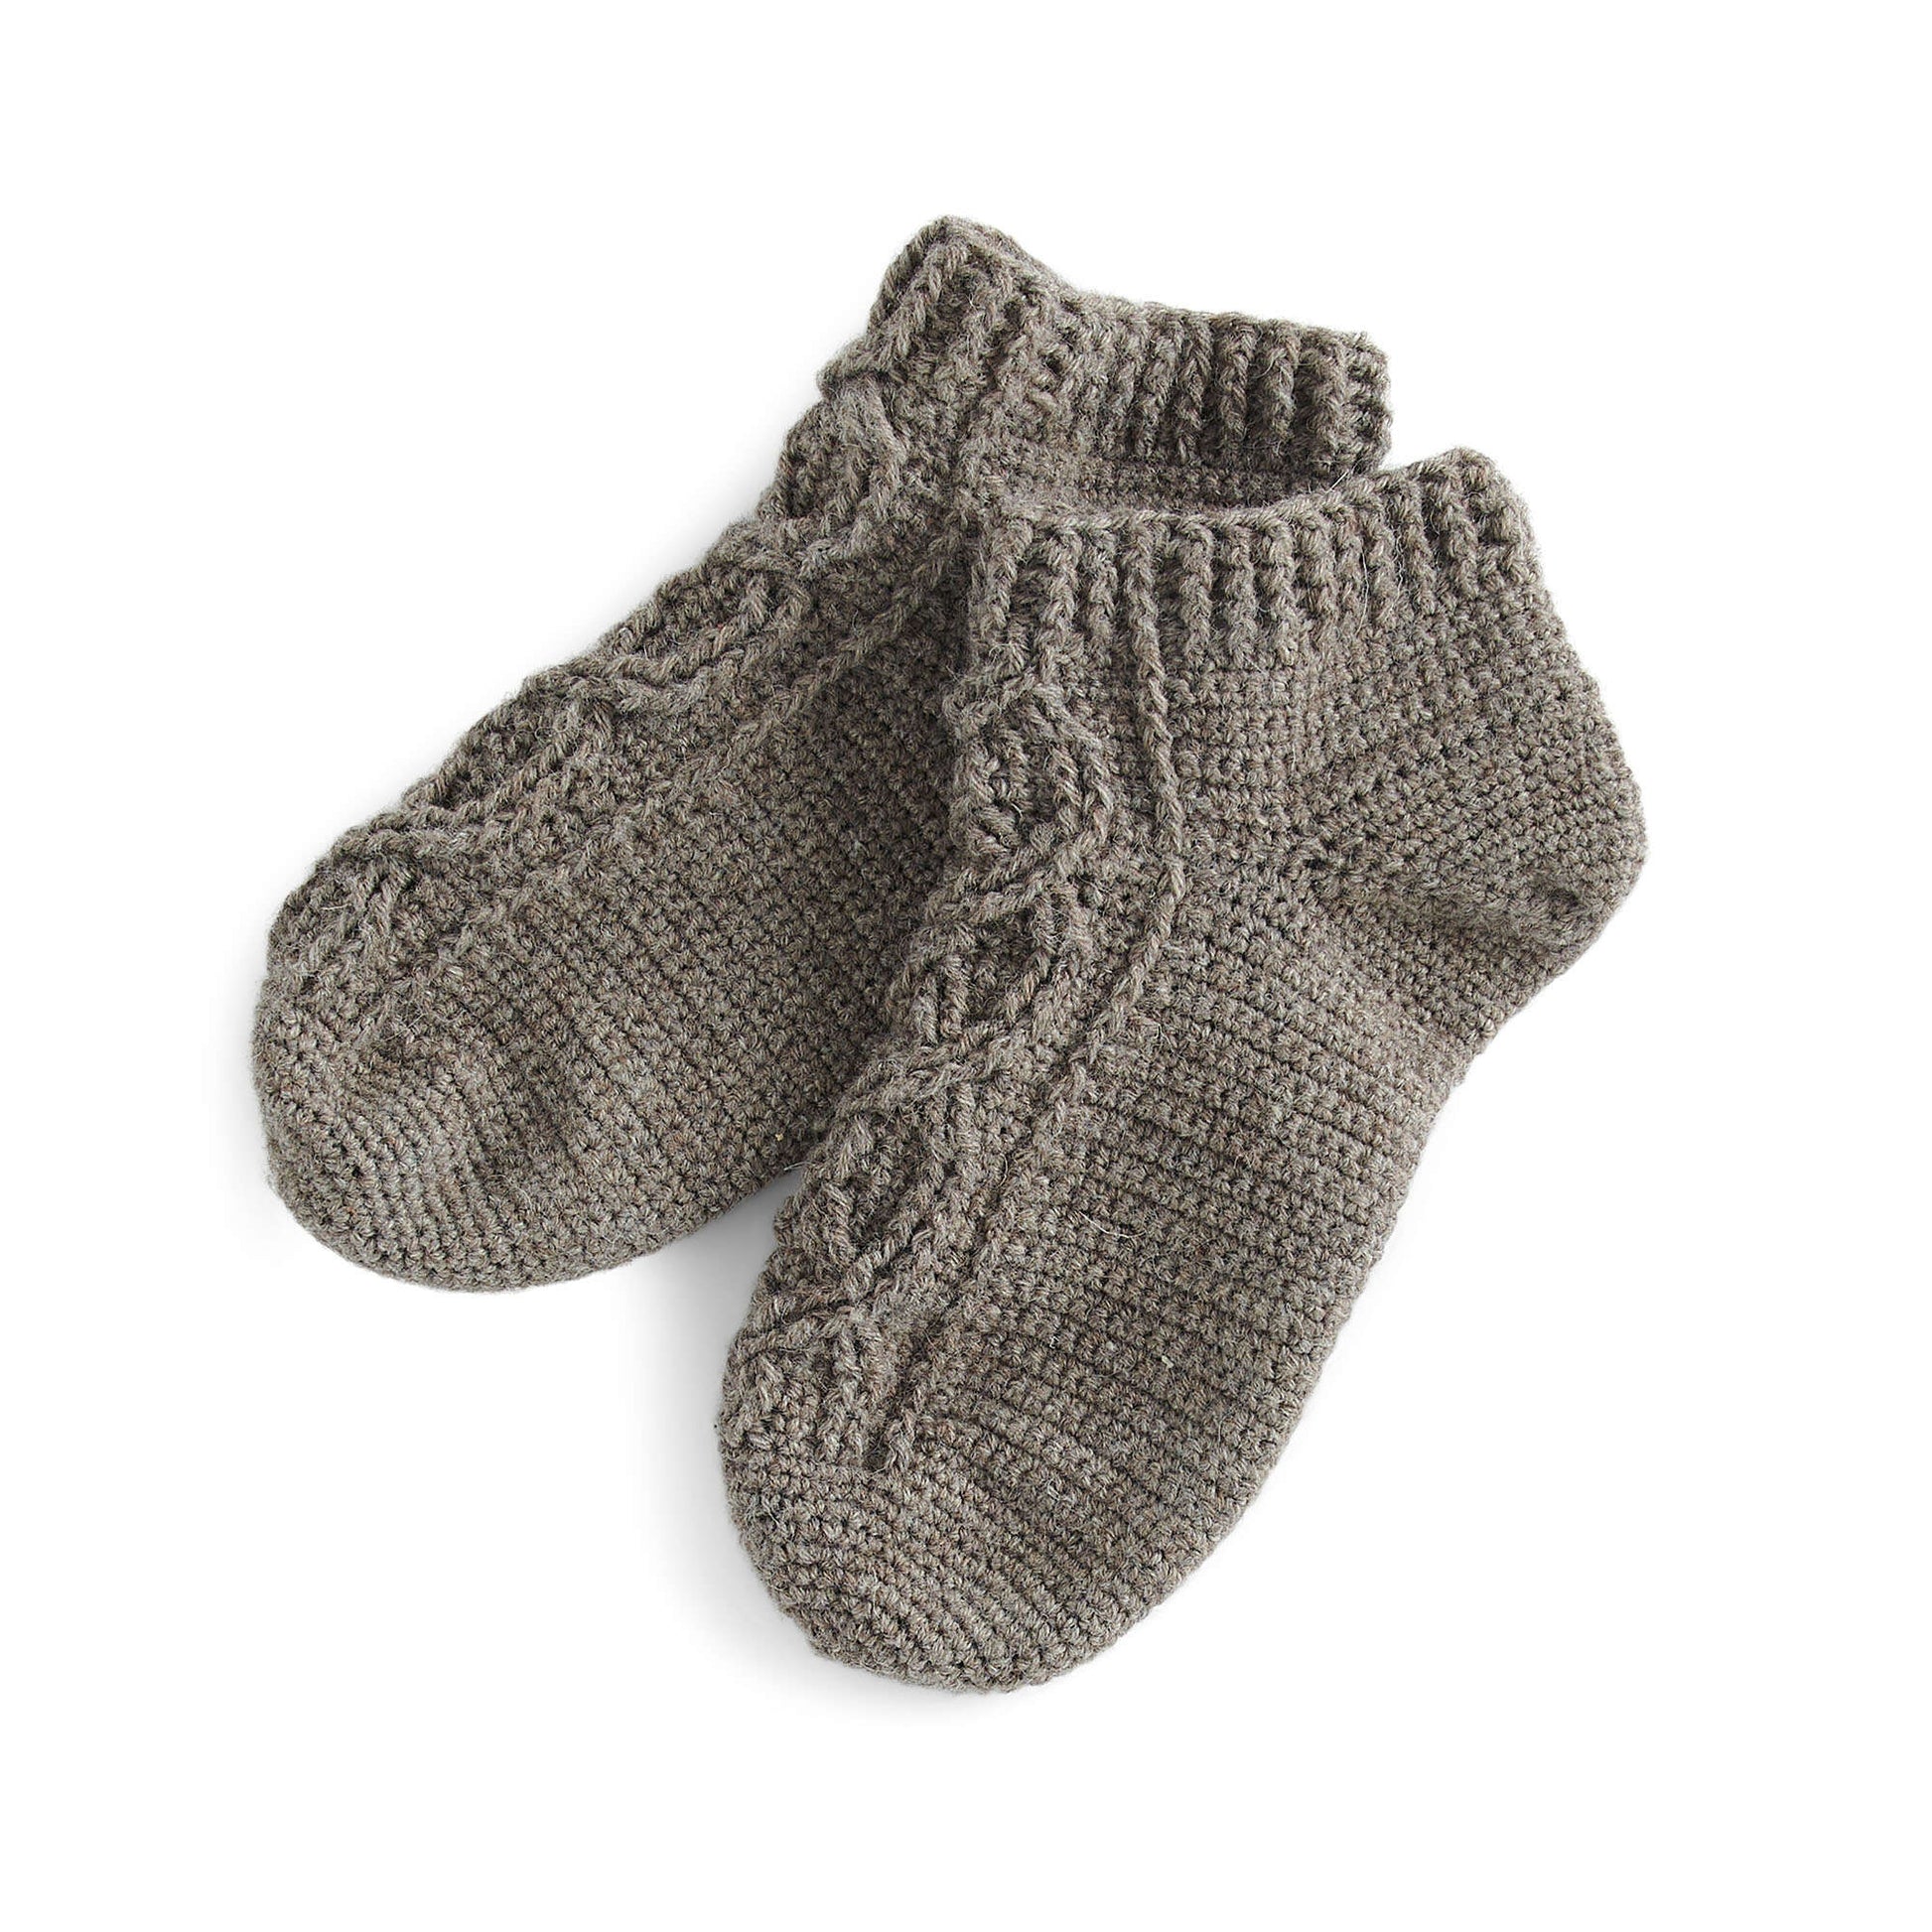 Free Patons Toe-Up Cabled Crochet Socks Pattern